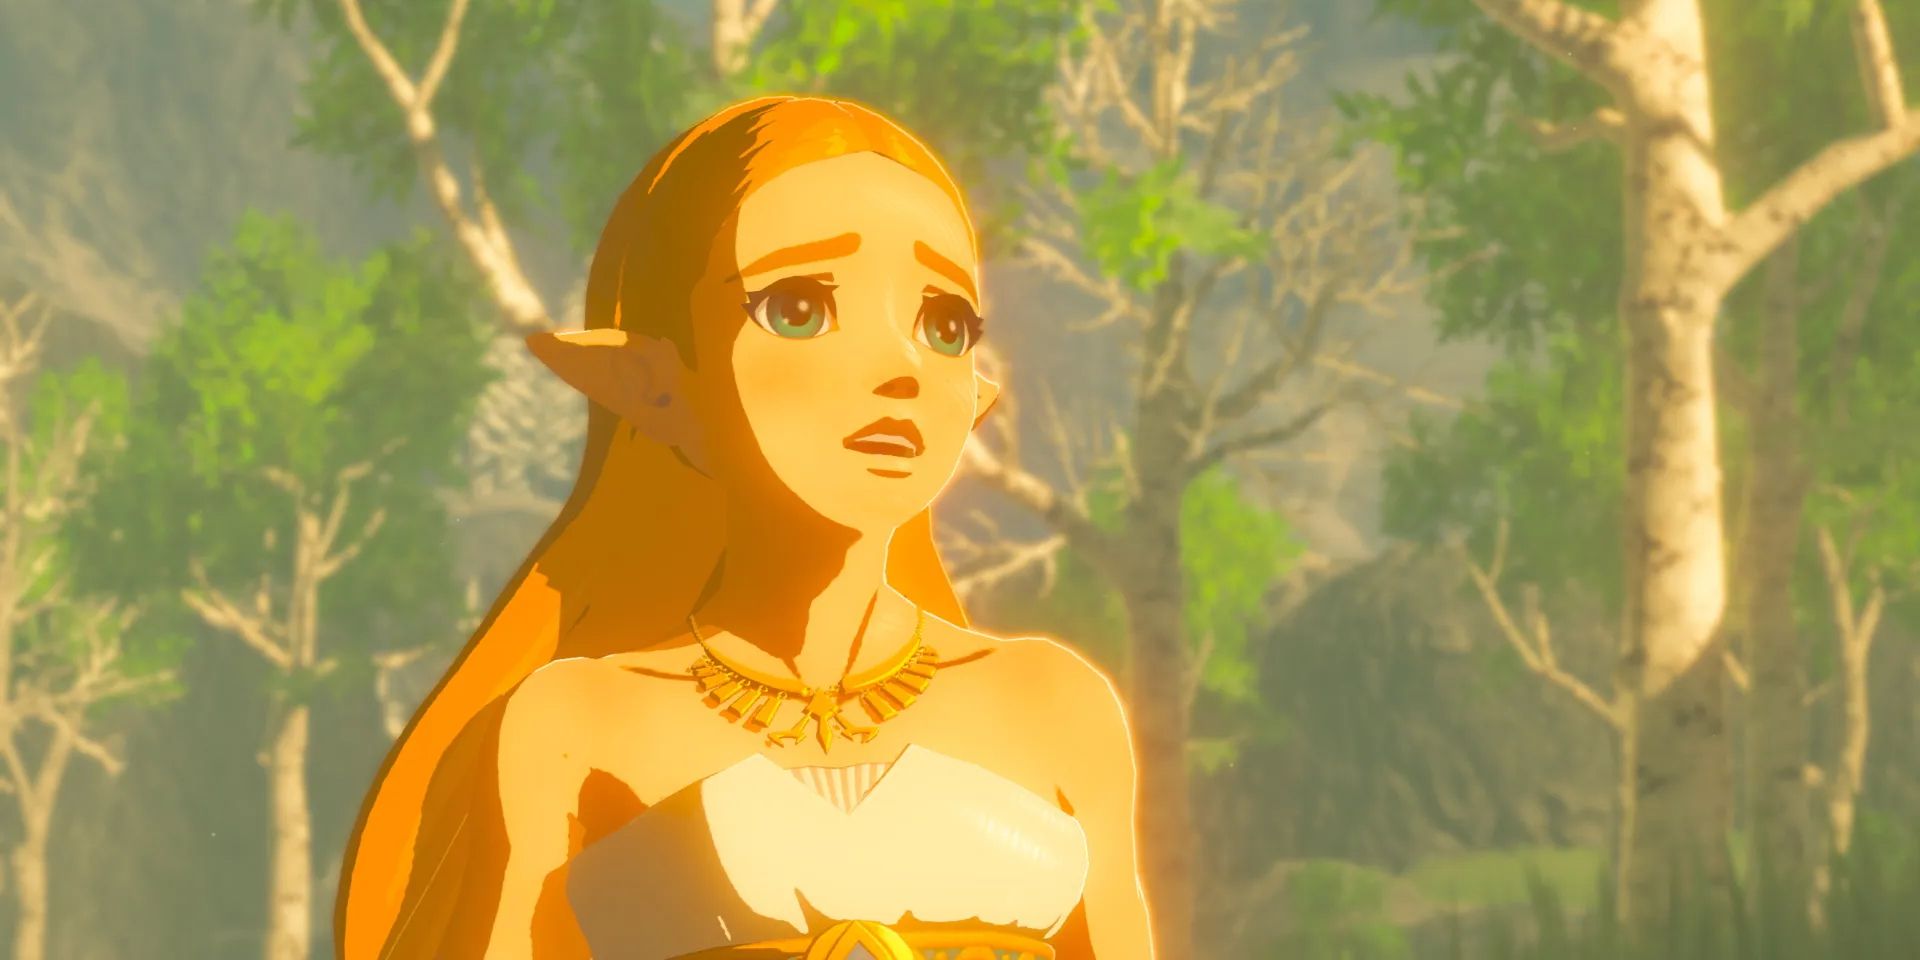 Zelda, waering a white dress and gold necklace, looks concernedly off into the distance while standing in front of a forest in The Legend of Zelda: Breath of the Wild